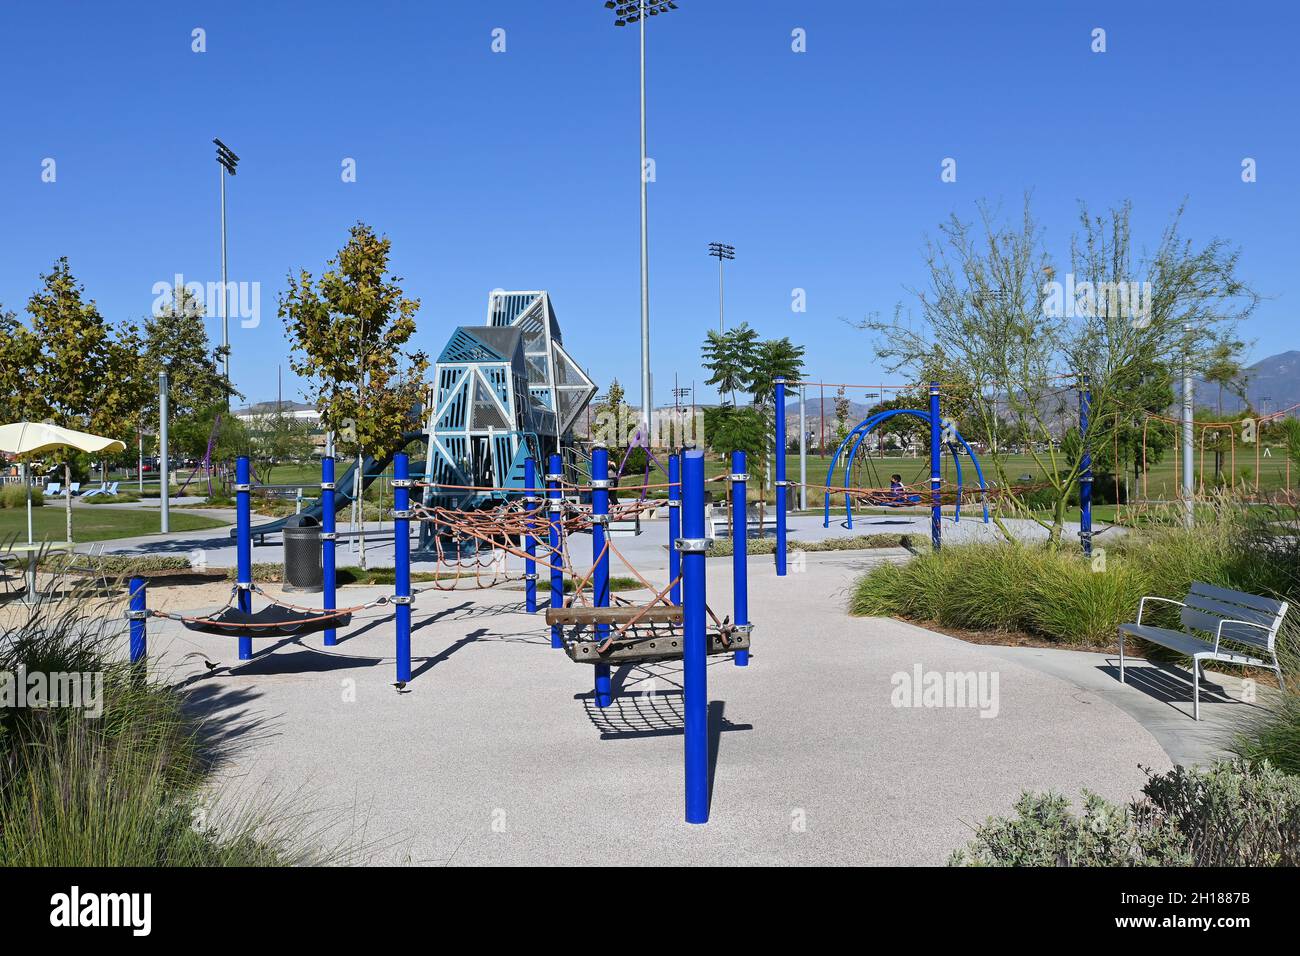 IRVINE, CALIFORNIA - 15 OCT 2021: The Kids Play Area with various equipment for young children. Stock Photo